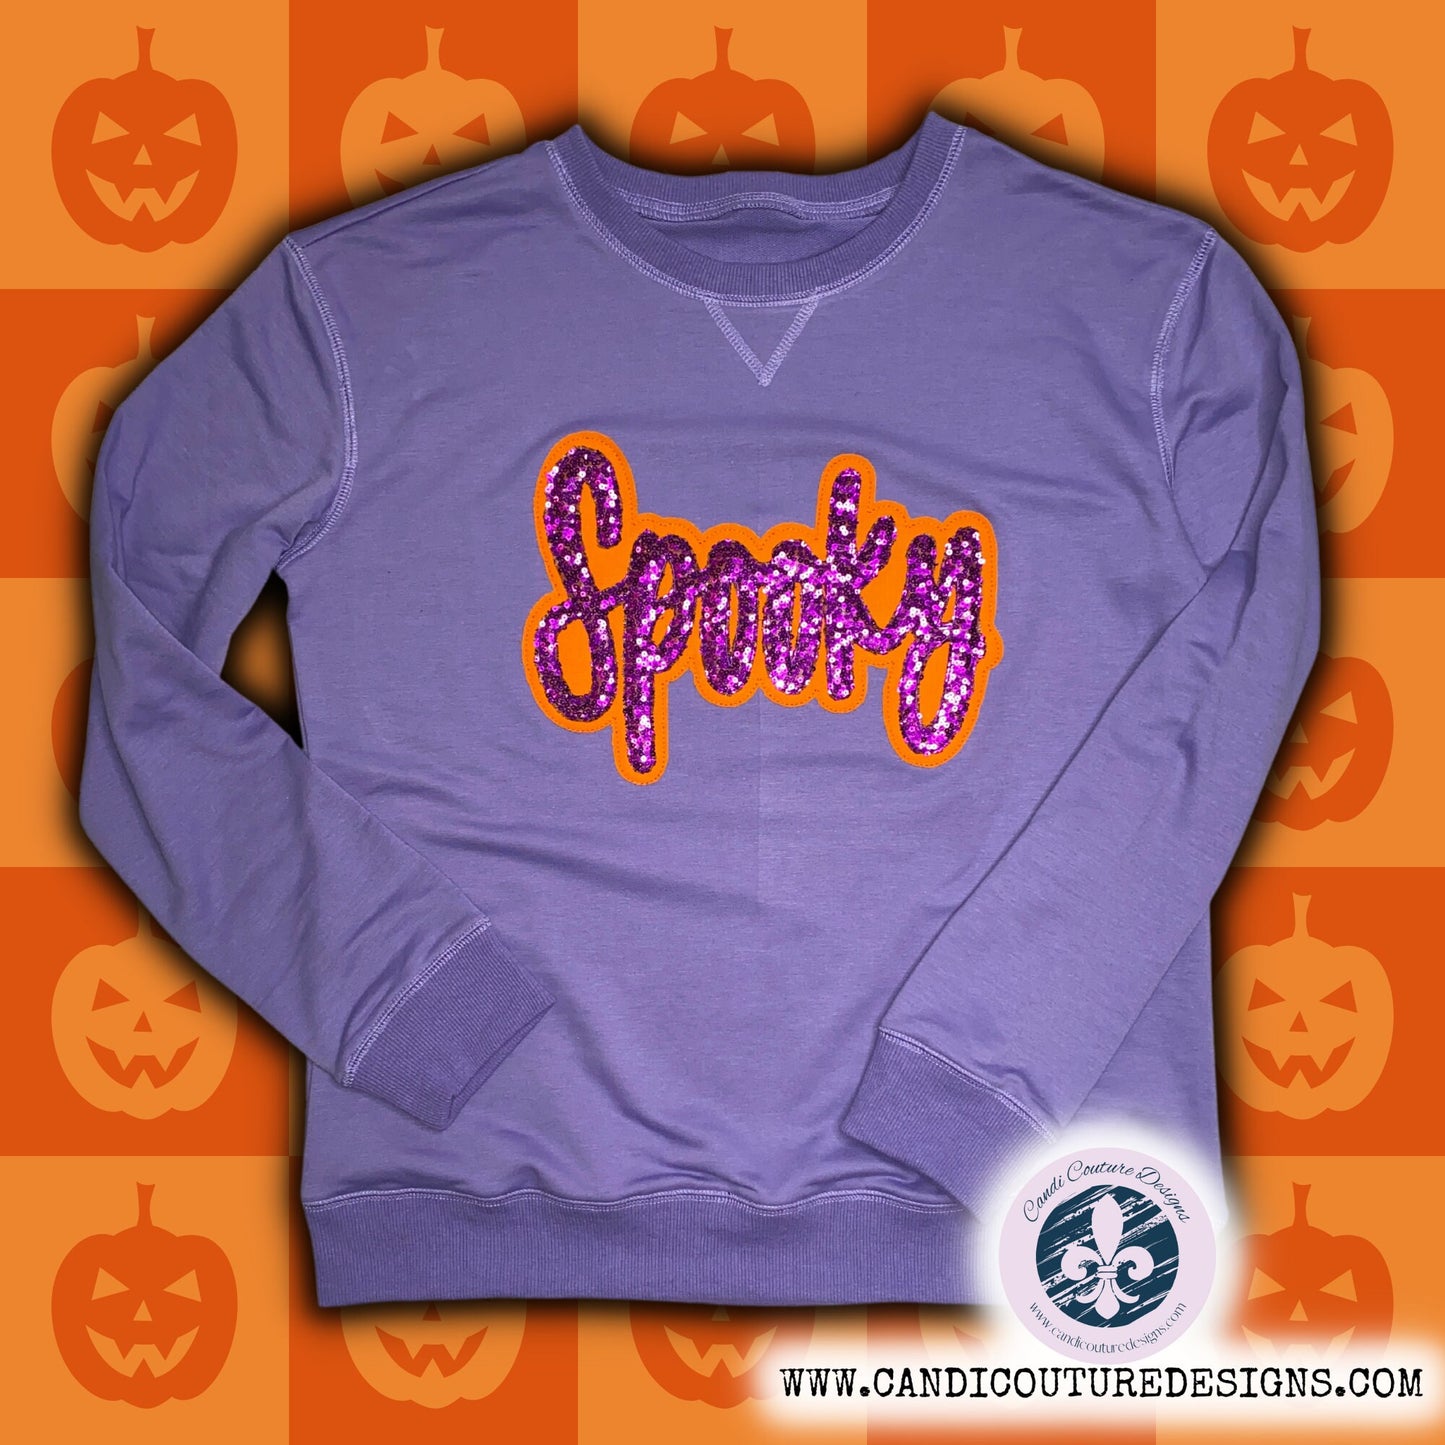 Halloween Spooky Sequin Sweatshirt, Spooky Season Graphic Tee, Cozy Applique Sweater, Preppy Sparkly Ghost Pullover, Personalized Gift